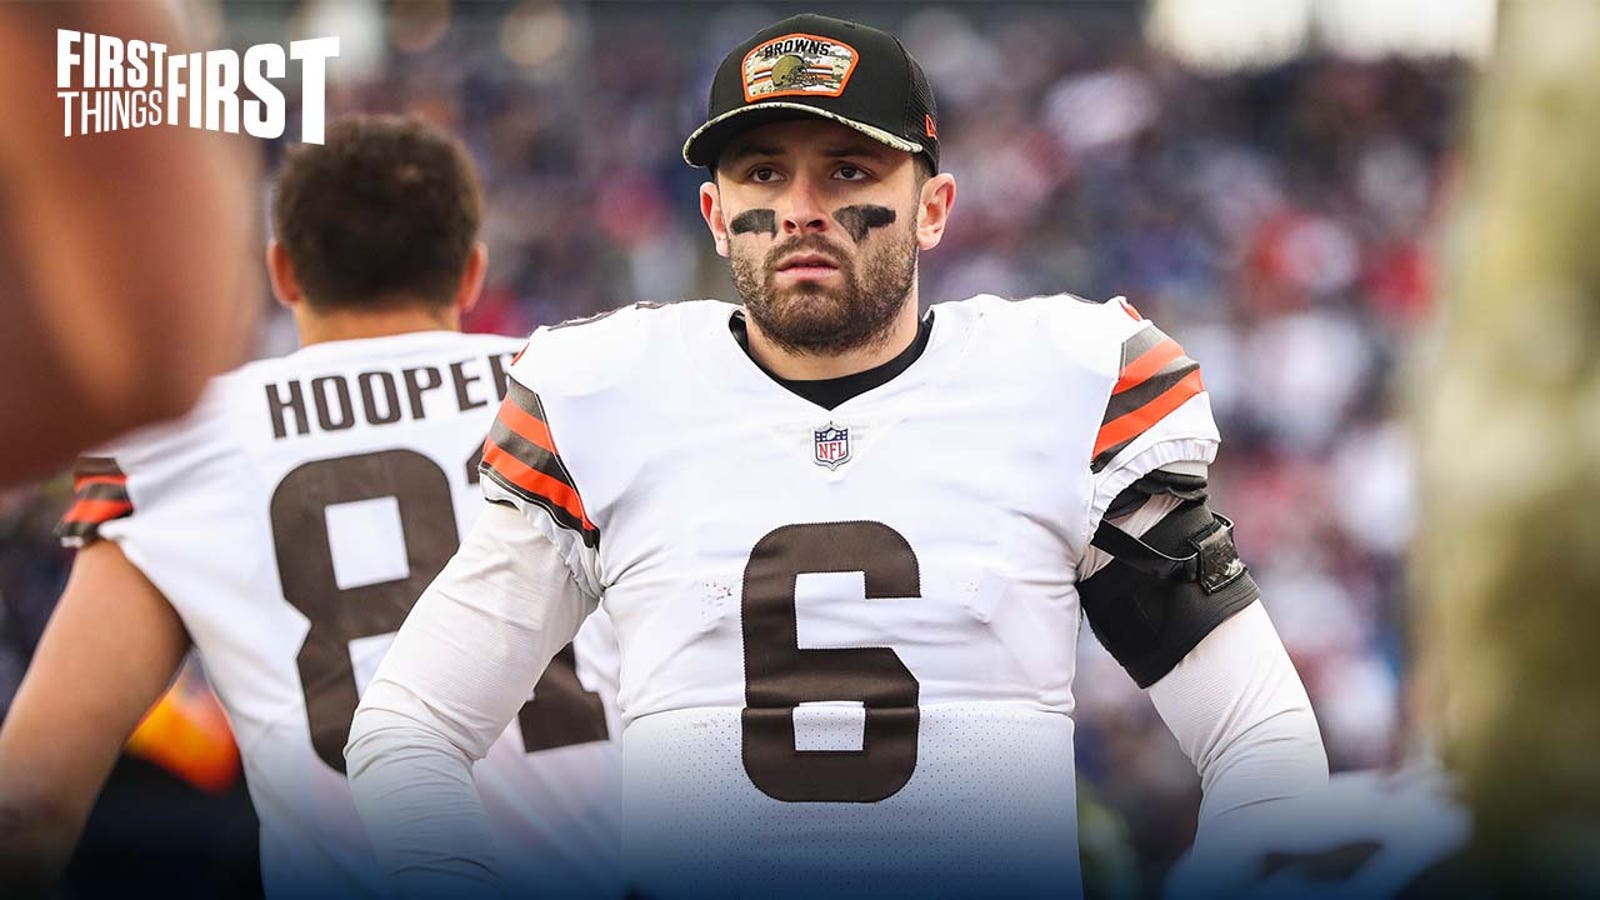 Nick Wright: 'It's a totally lost season for the 7-7 Cleveland Browns'